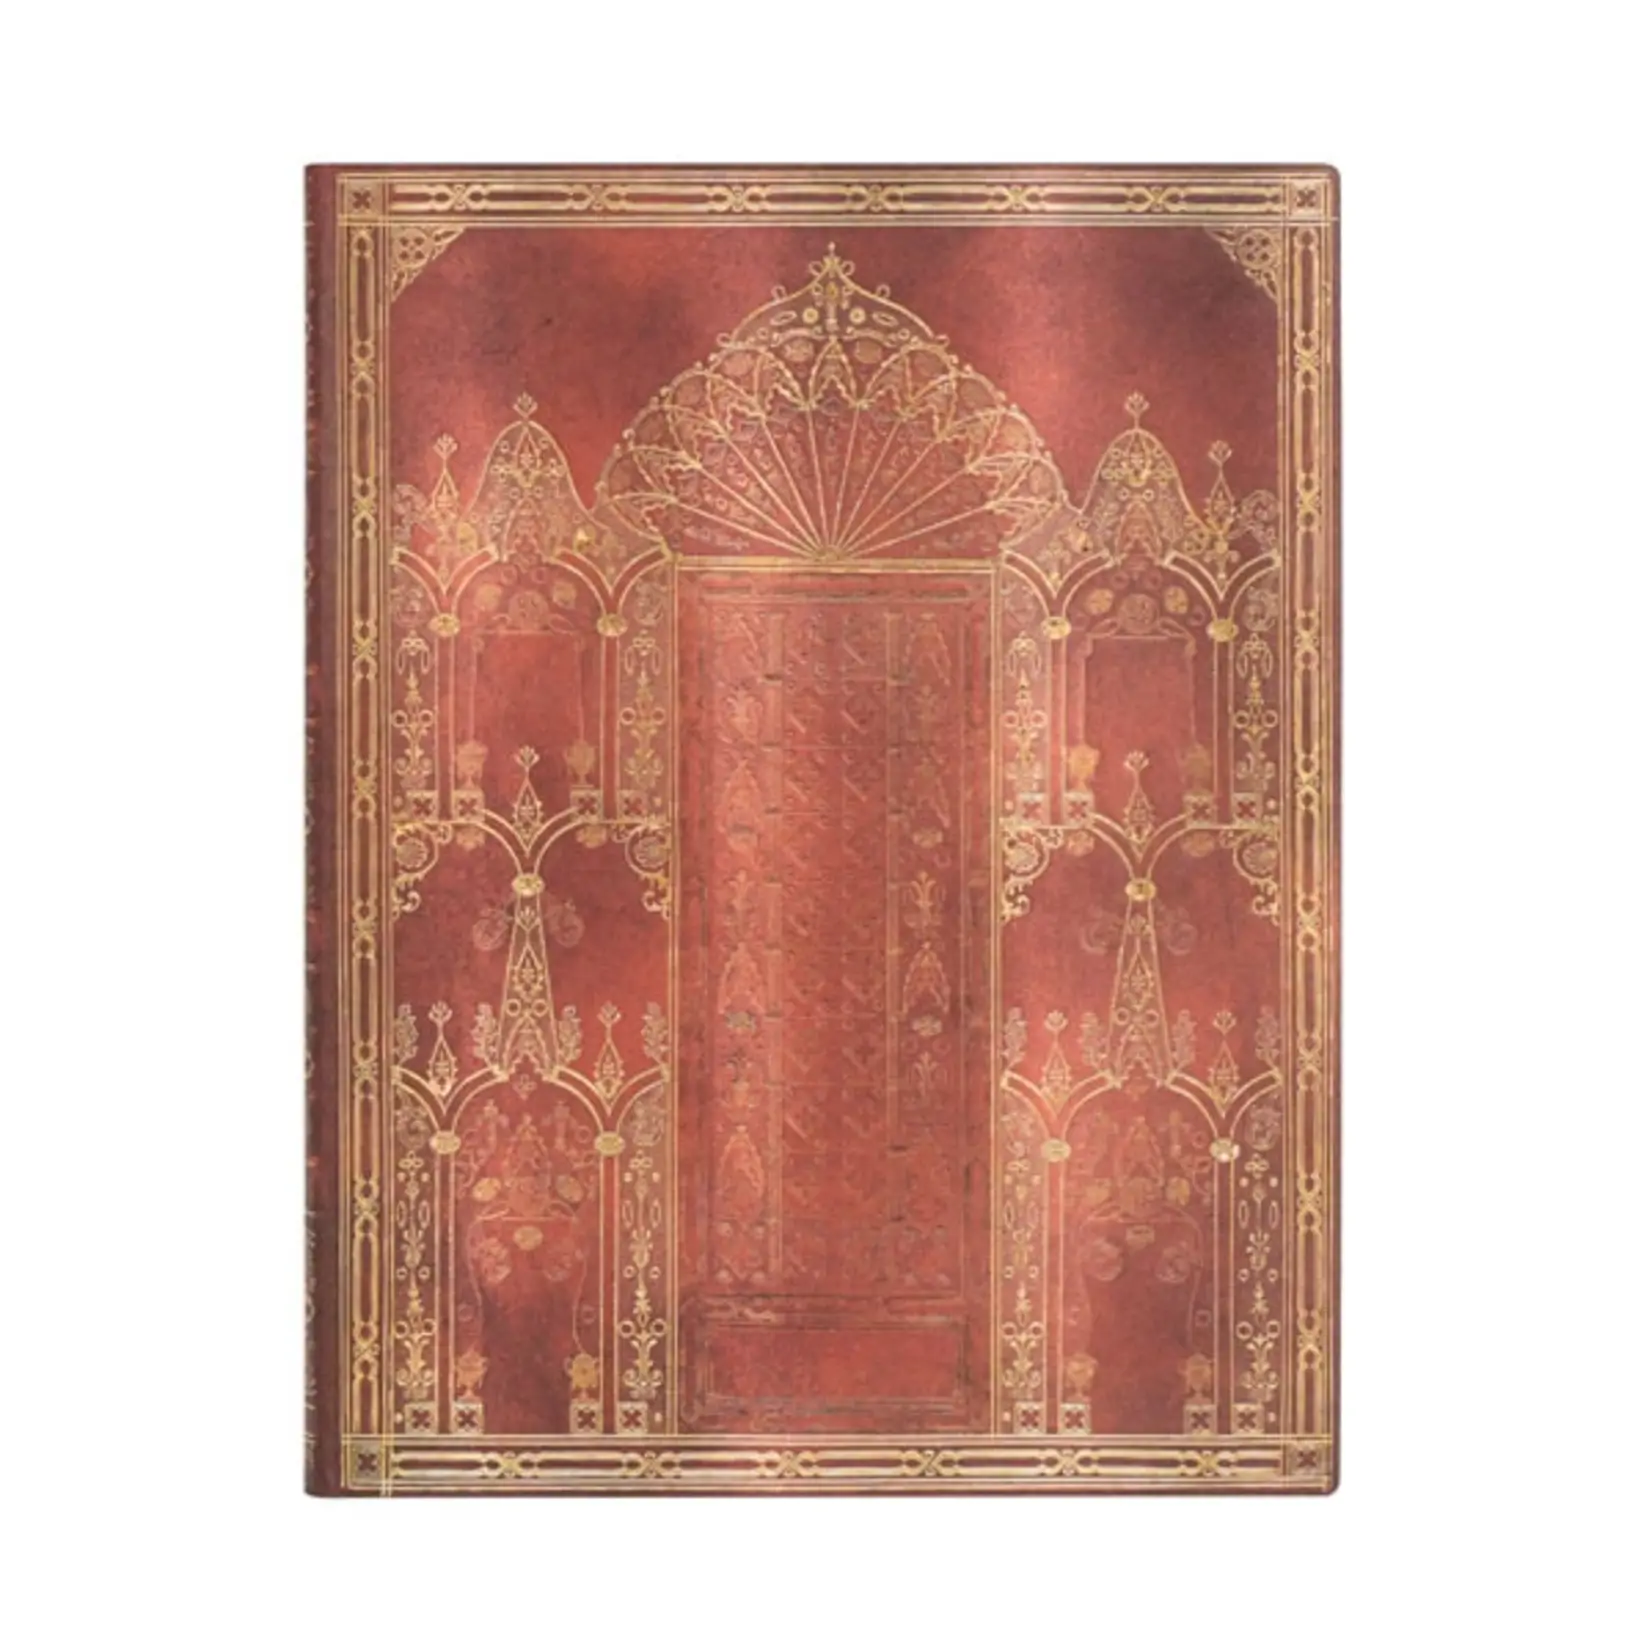 Paperblanks Journals Gothic Revival Mini Lined